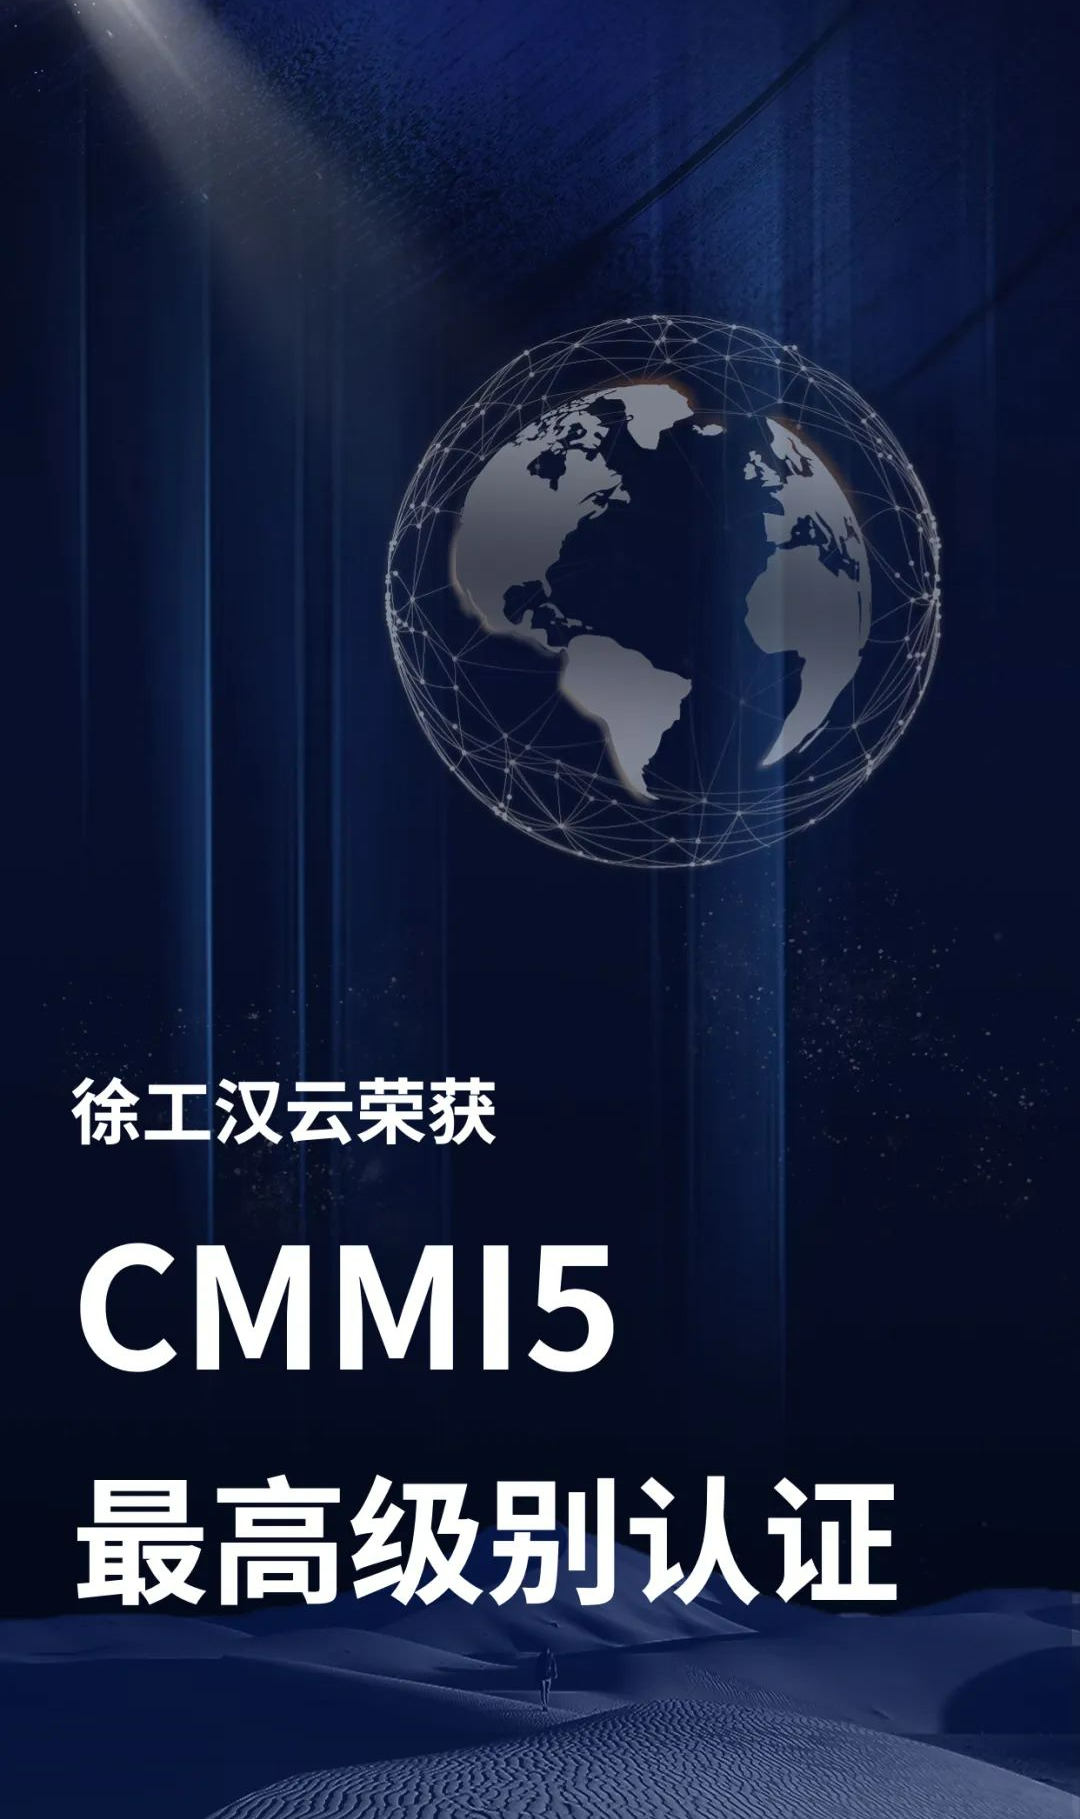 The highest level of international recognition! XCMG Hanyun won CMMI5 certification